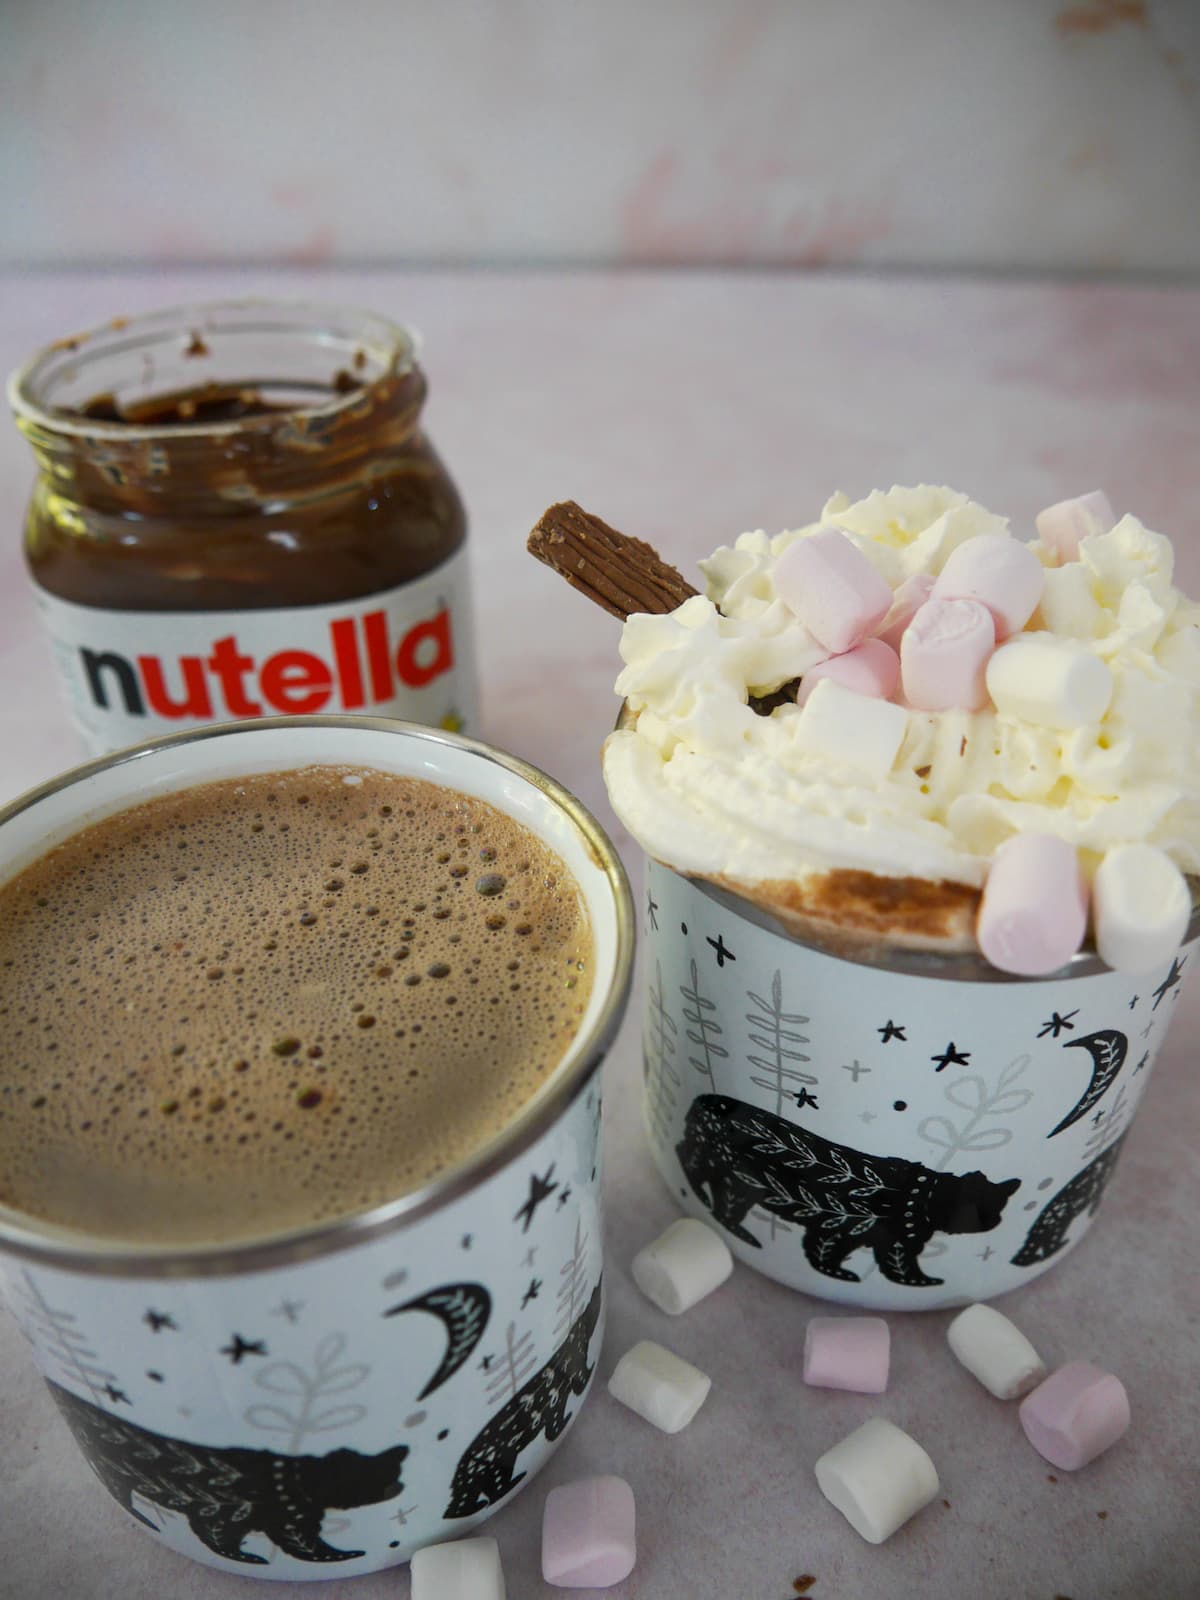 Two mugs of hot chocolate, one topped with whipped cream, mini marshmallows and a chocolate log, with an open jar of Nutella, mini marshmallows and chocolate logs set alongside.